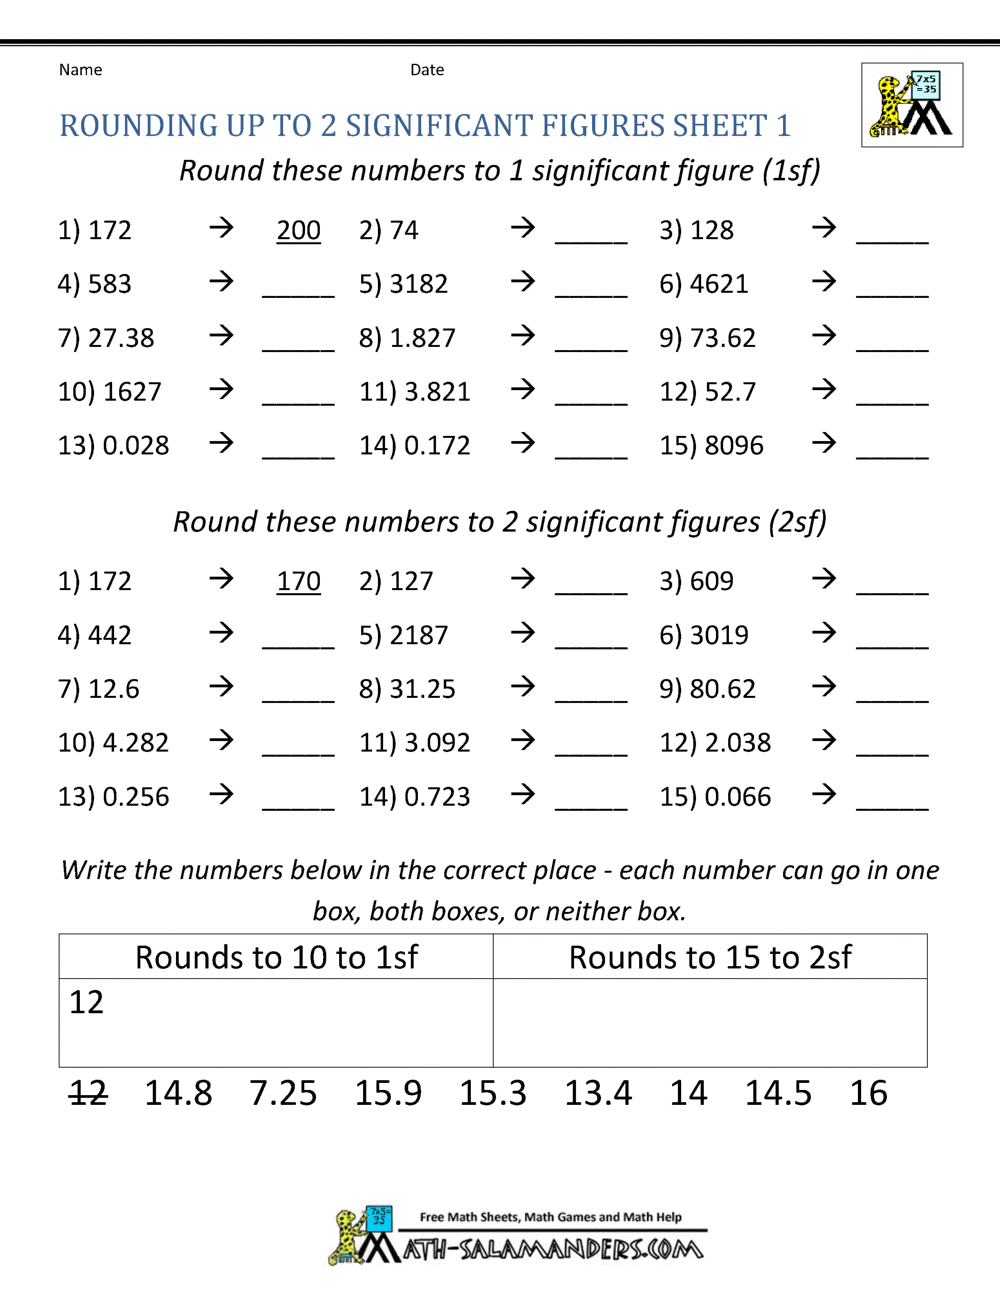 Rounding Significant Figures Regarding Significant Figures Worksheet Answers